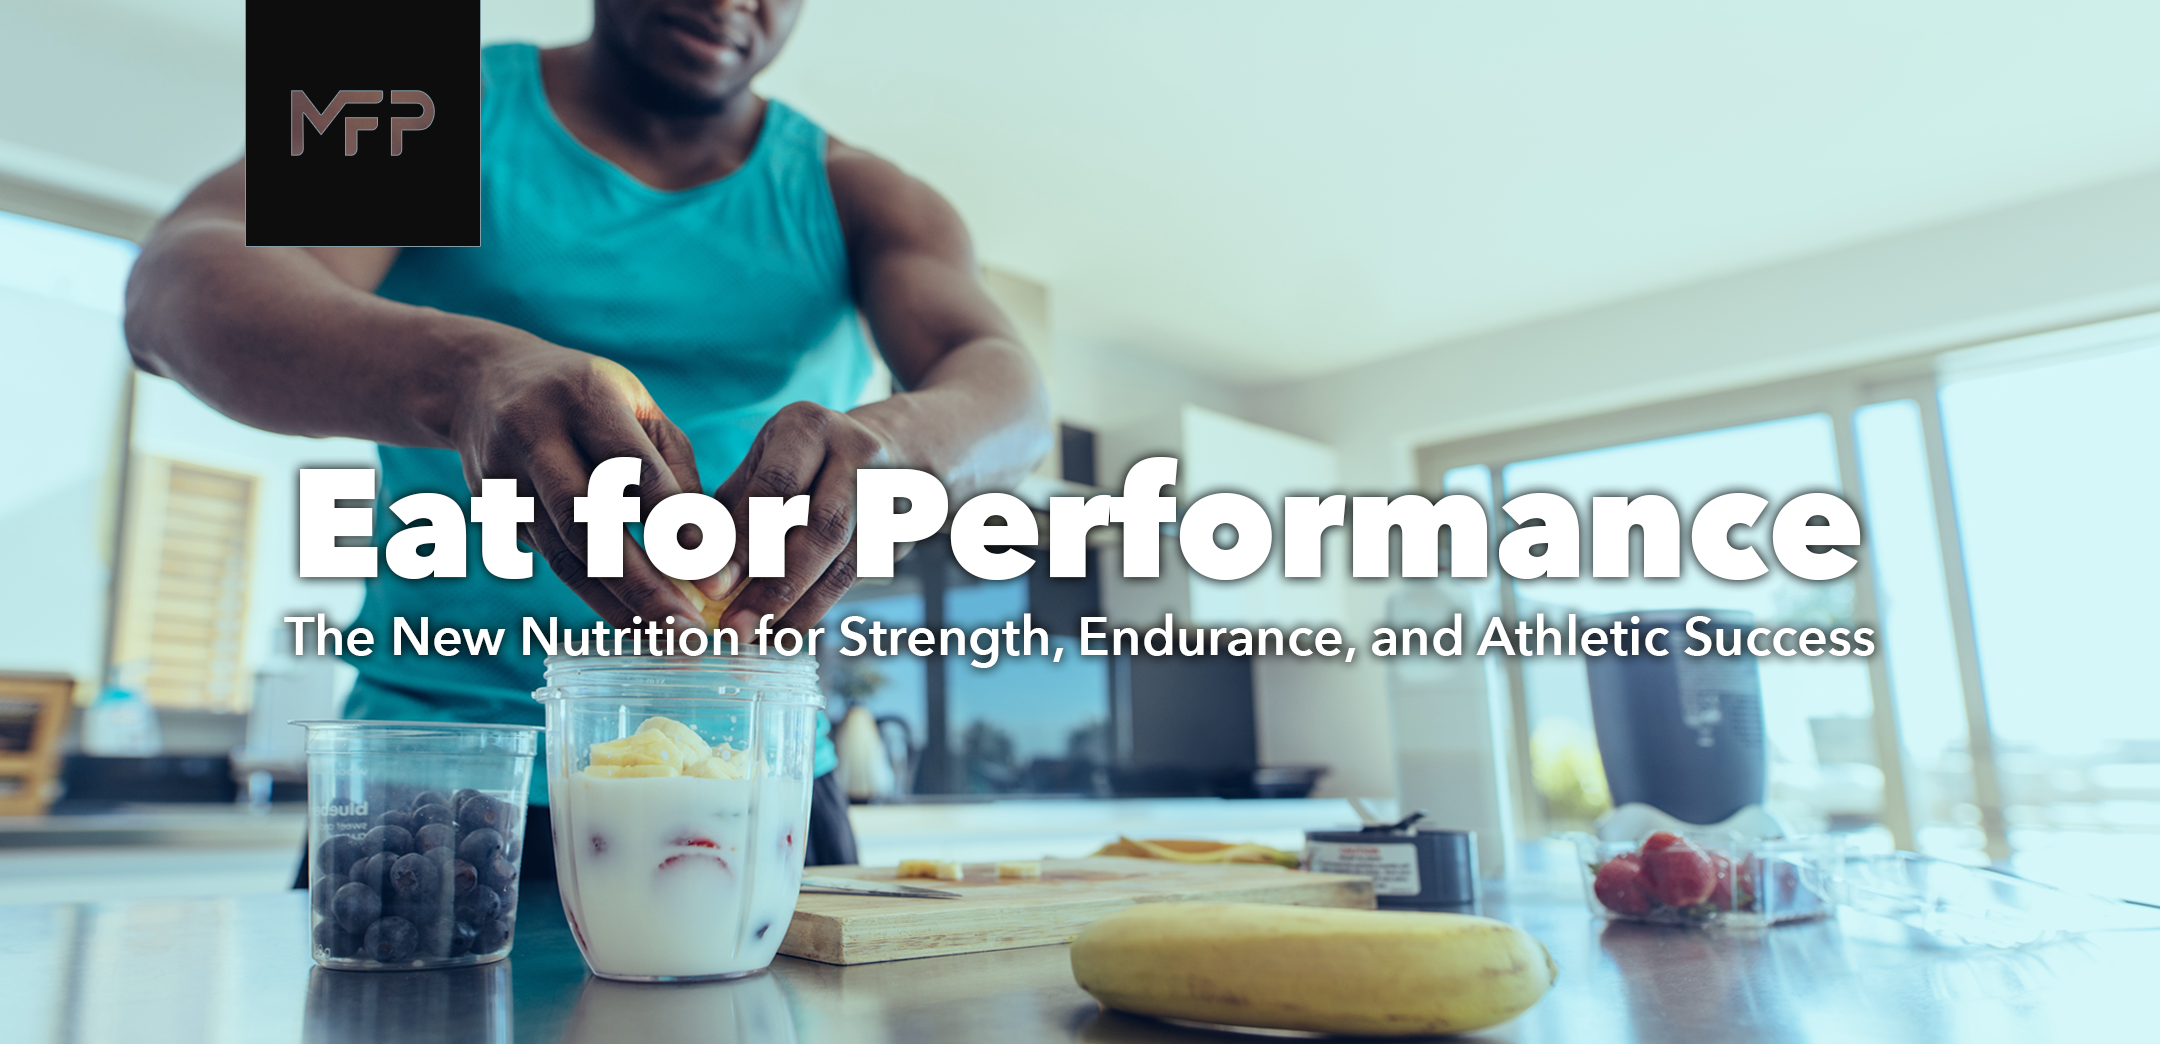 Eat for Performance Guide